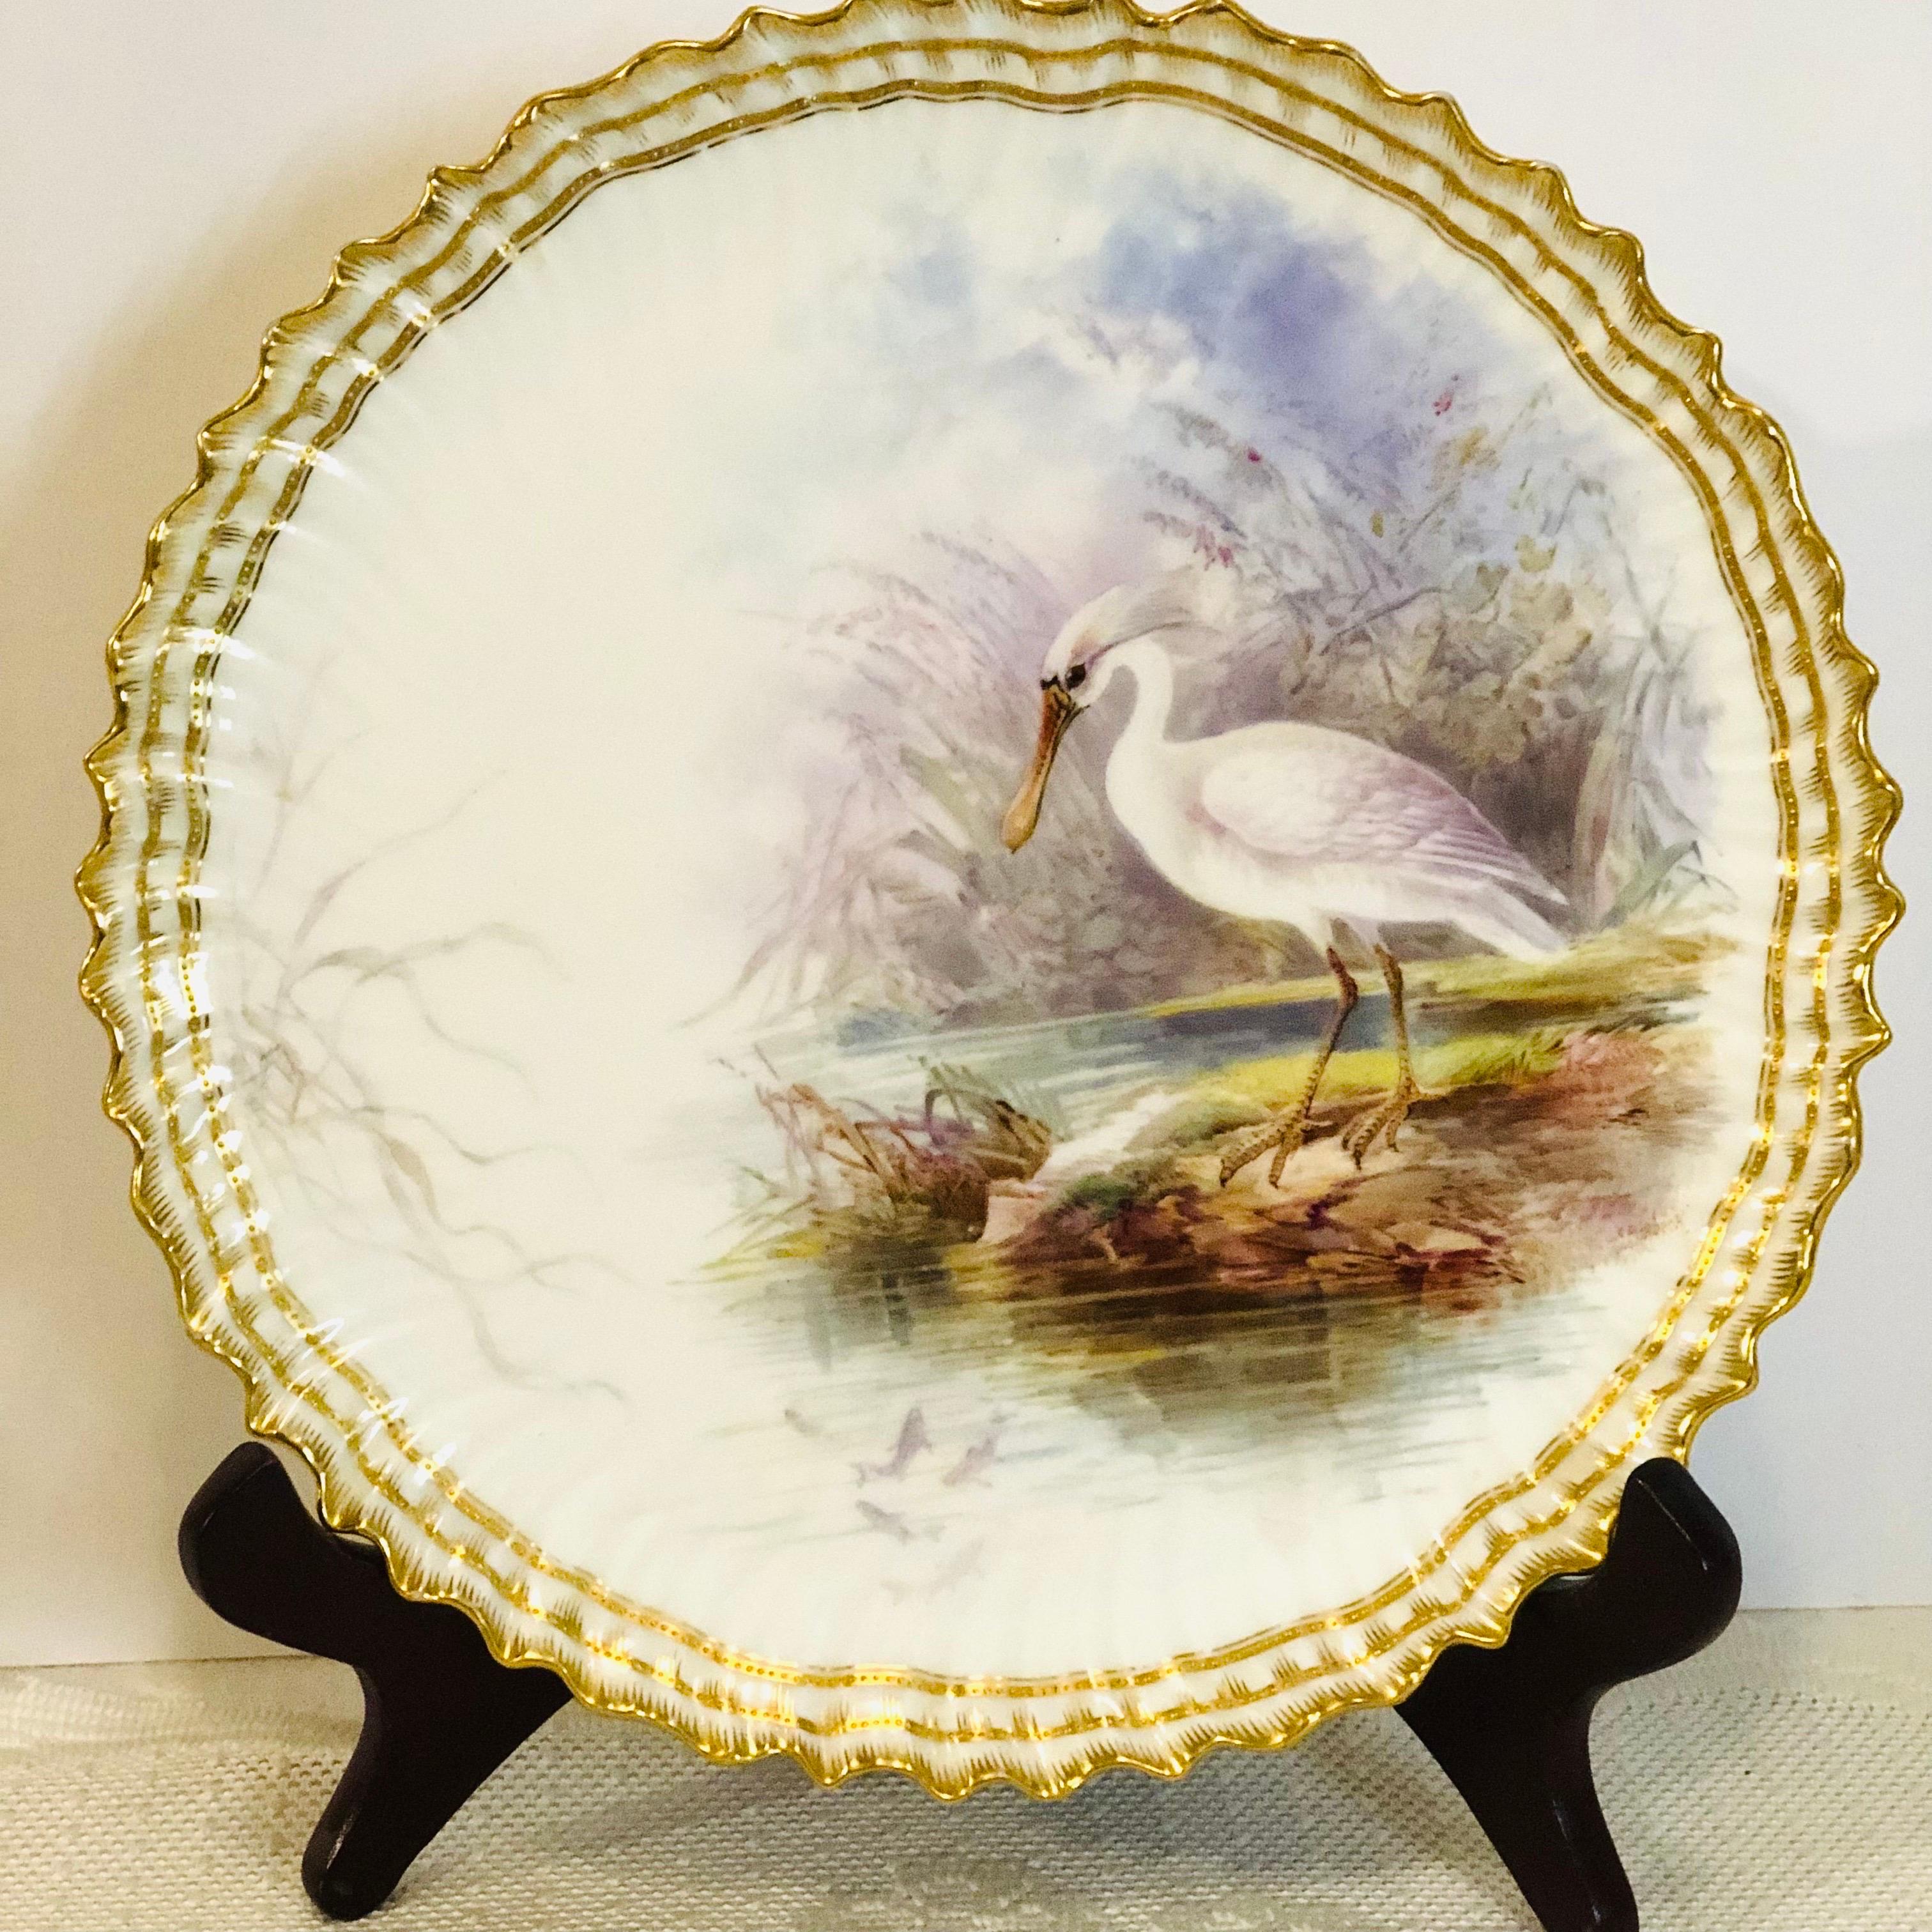 Set of 11 Cauldon Plates Each Painted Exquisitely With a Different Bird  1